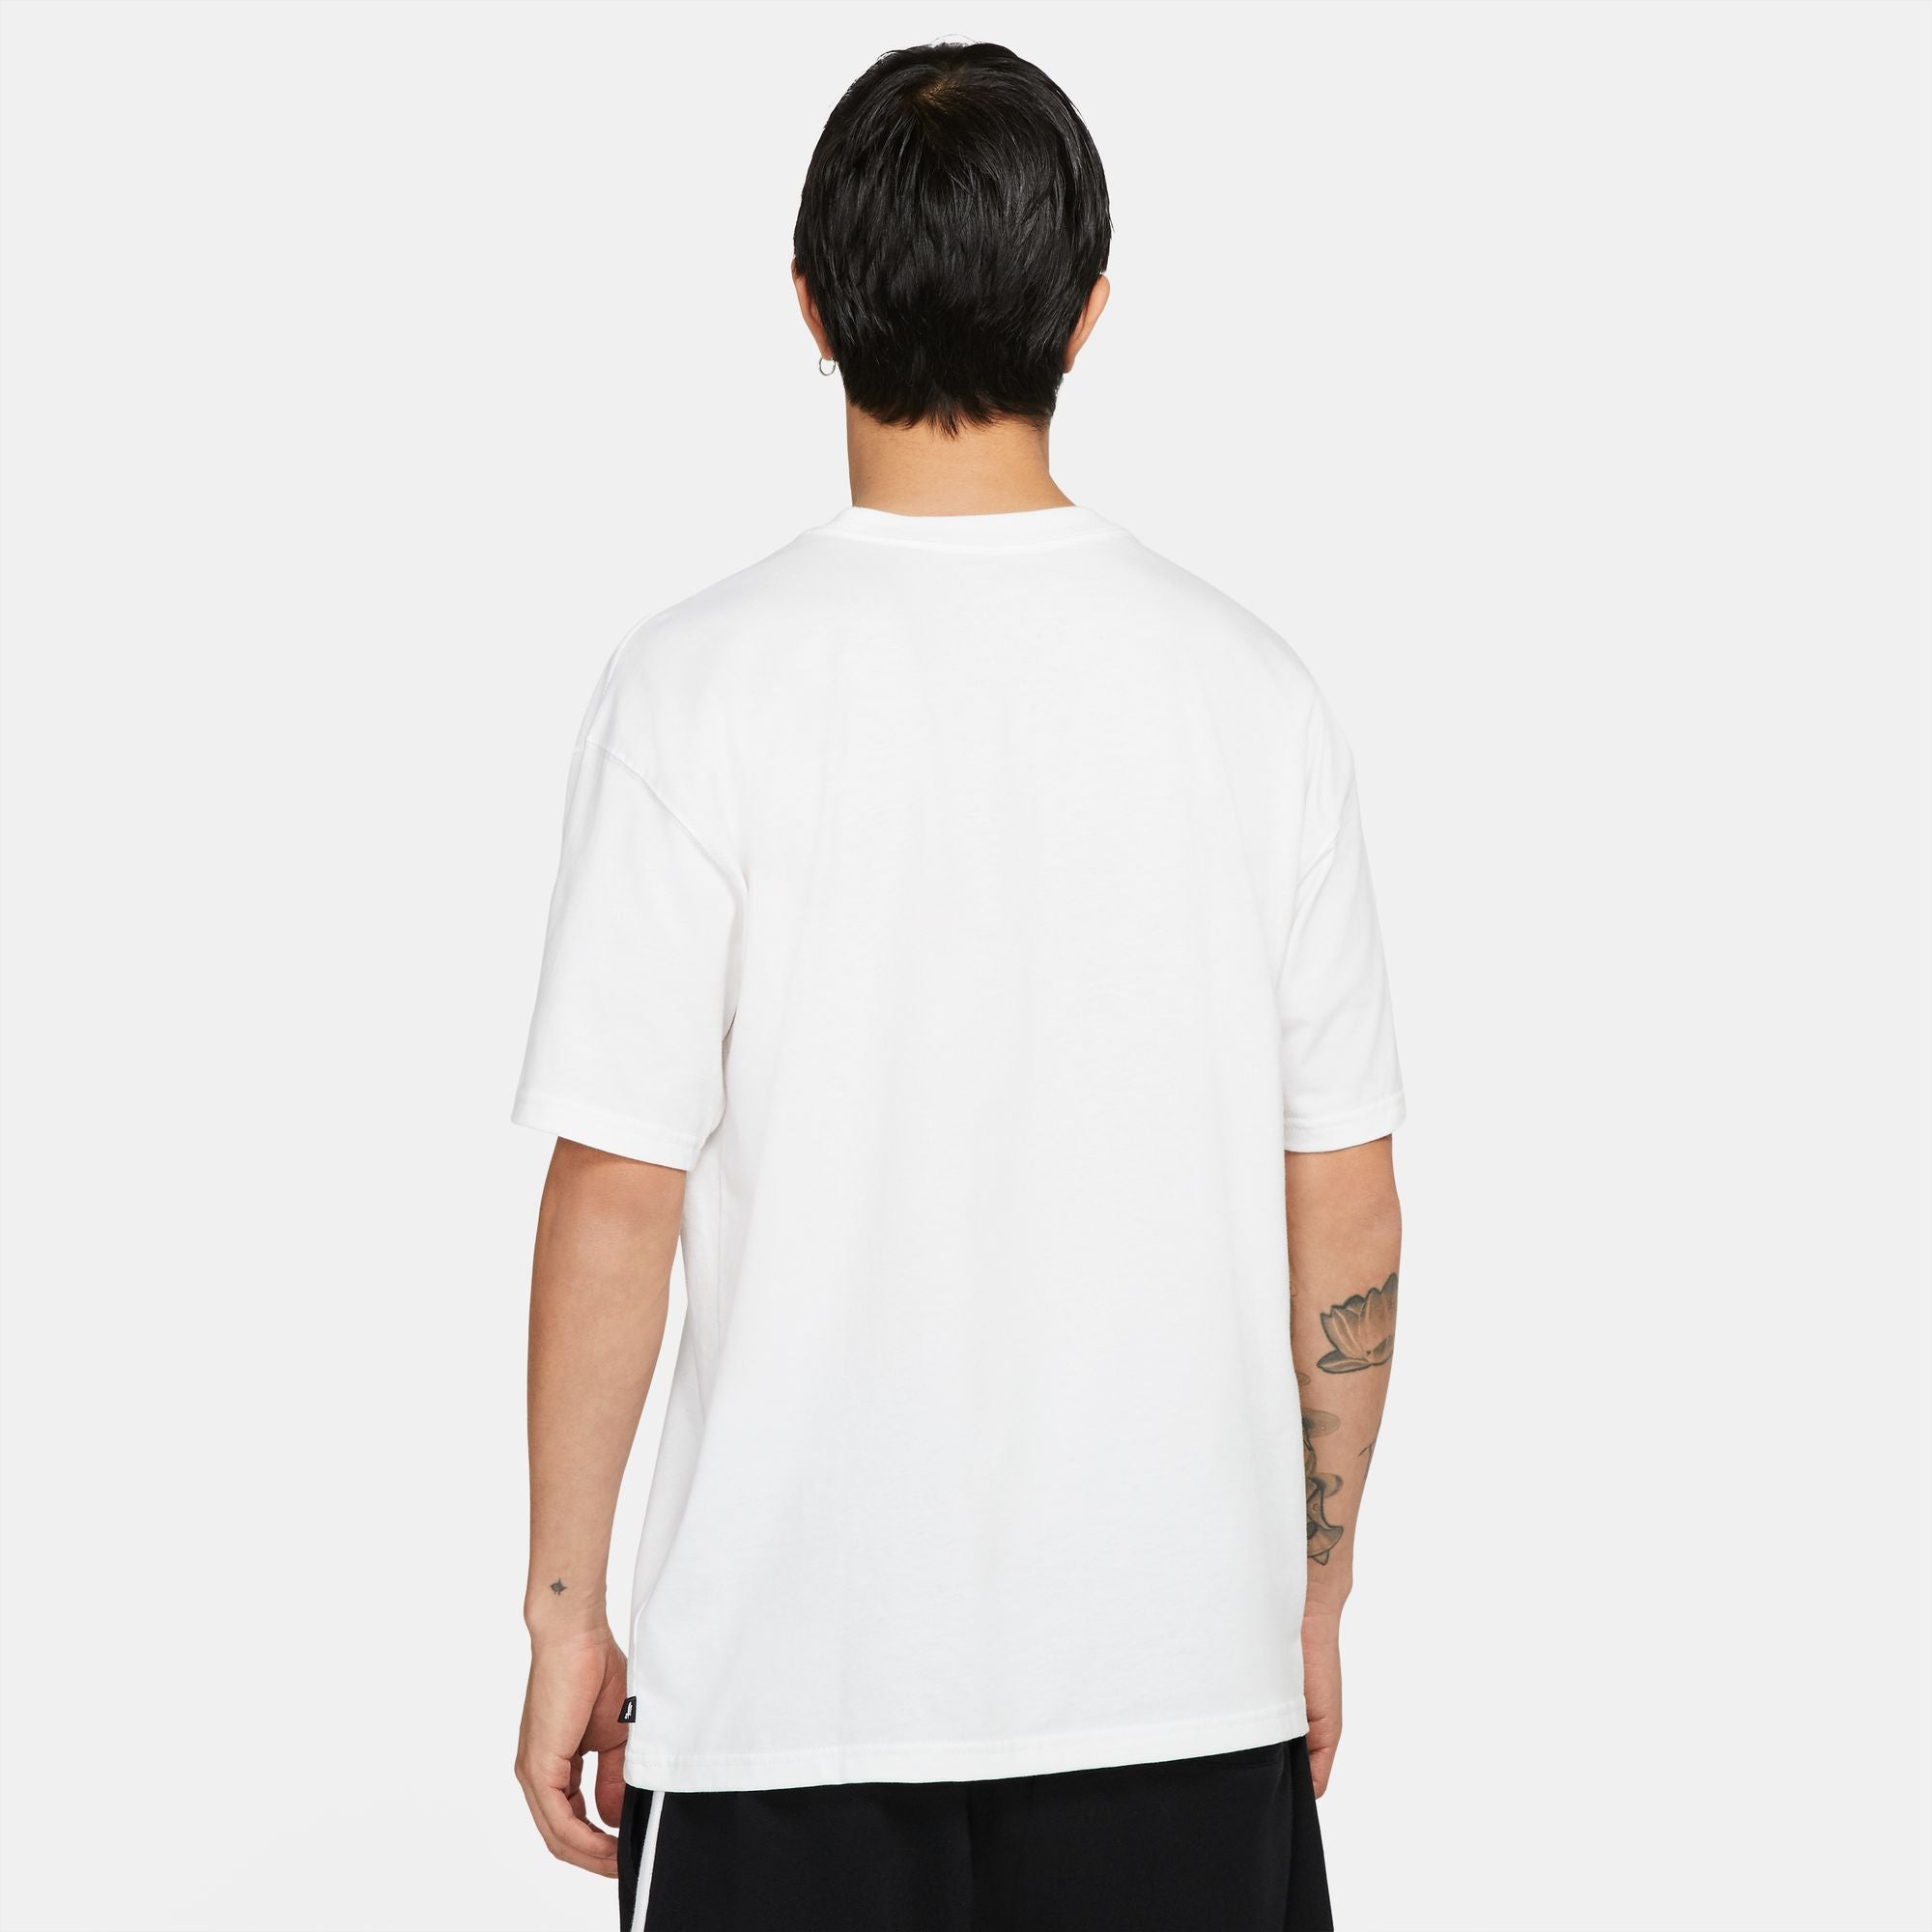 White nike short sleeve t-shirt with black SB swoosh logo on front. Free uk shipping for orders over £50